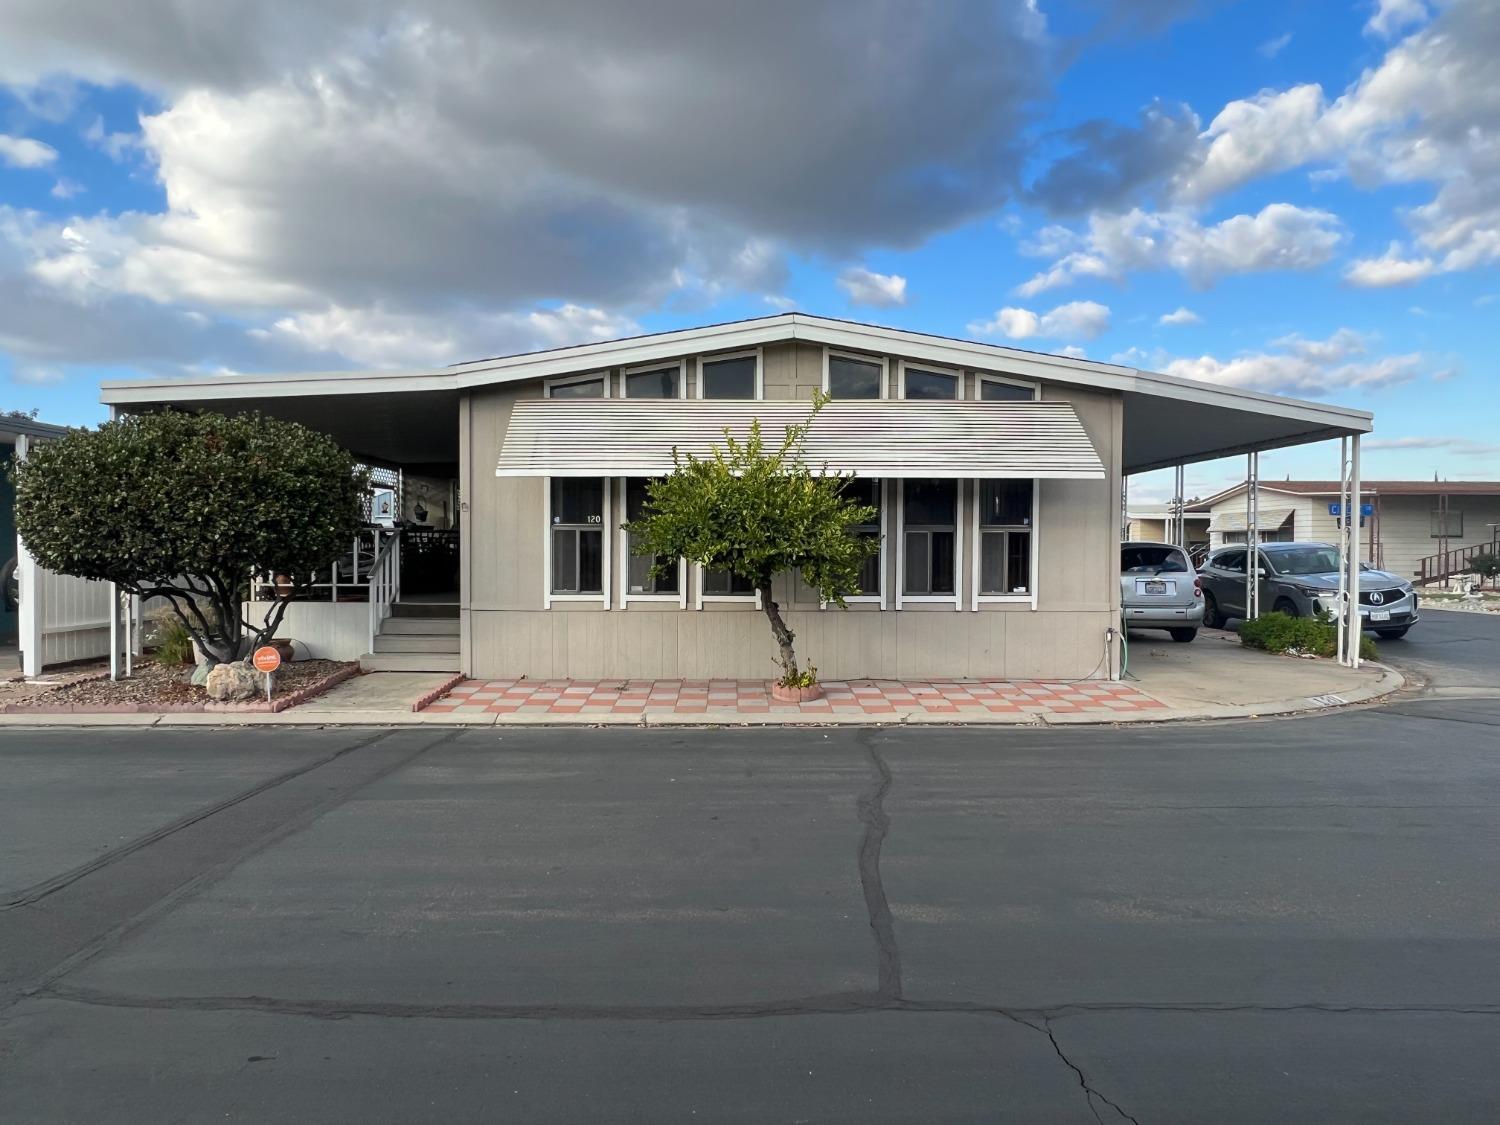 Photo of 1400 Tully Rd #120 in Turlock, CA